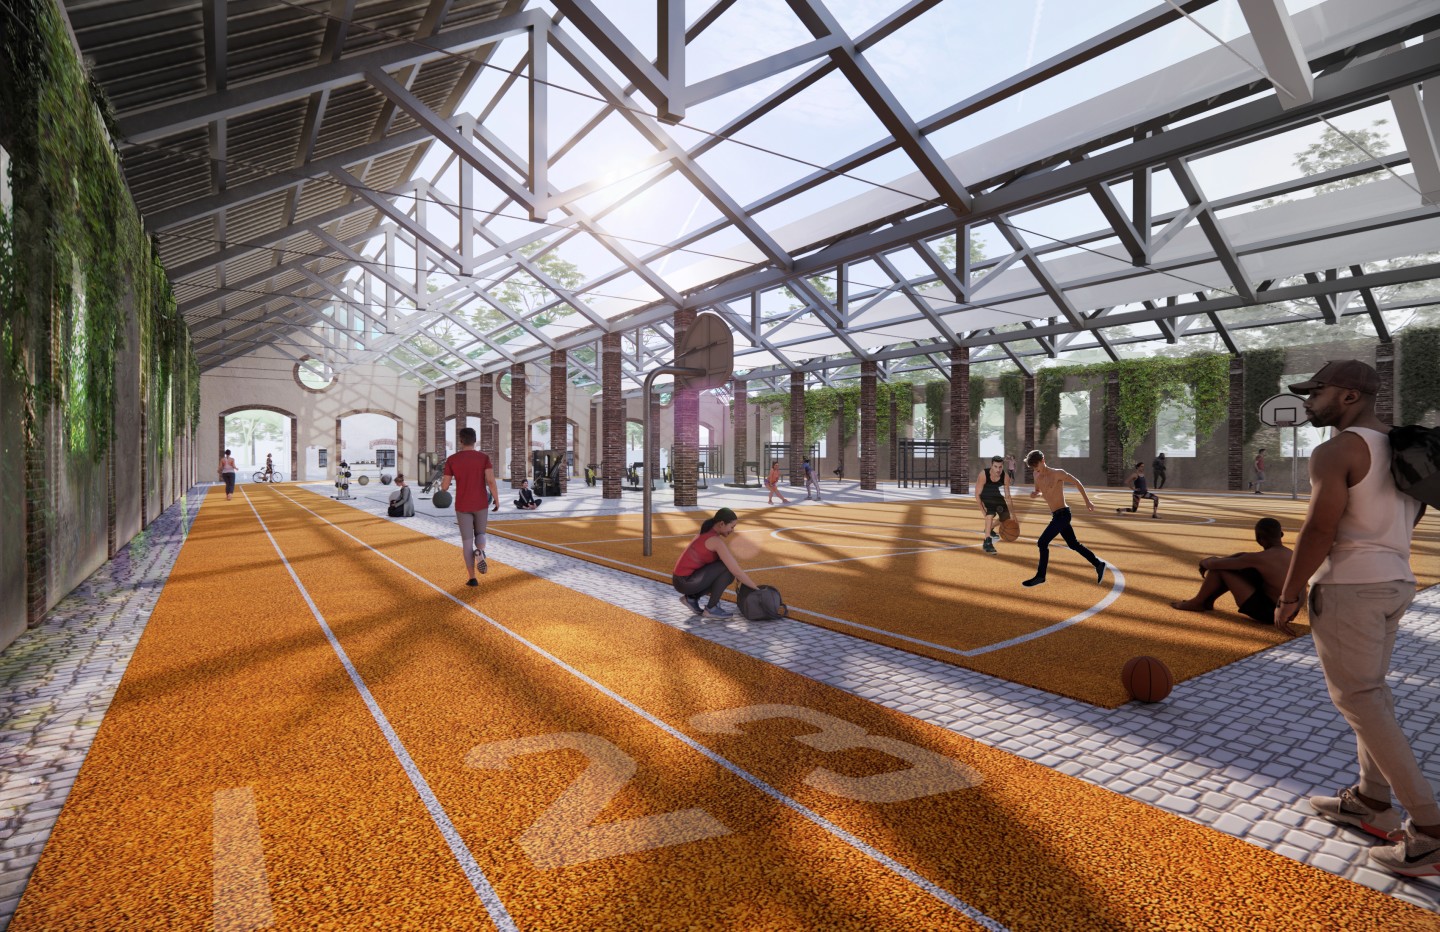 Parco Romana will involve the transformation of old train repair sheds into new spaces for the community, including the sports center shown